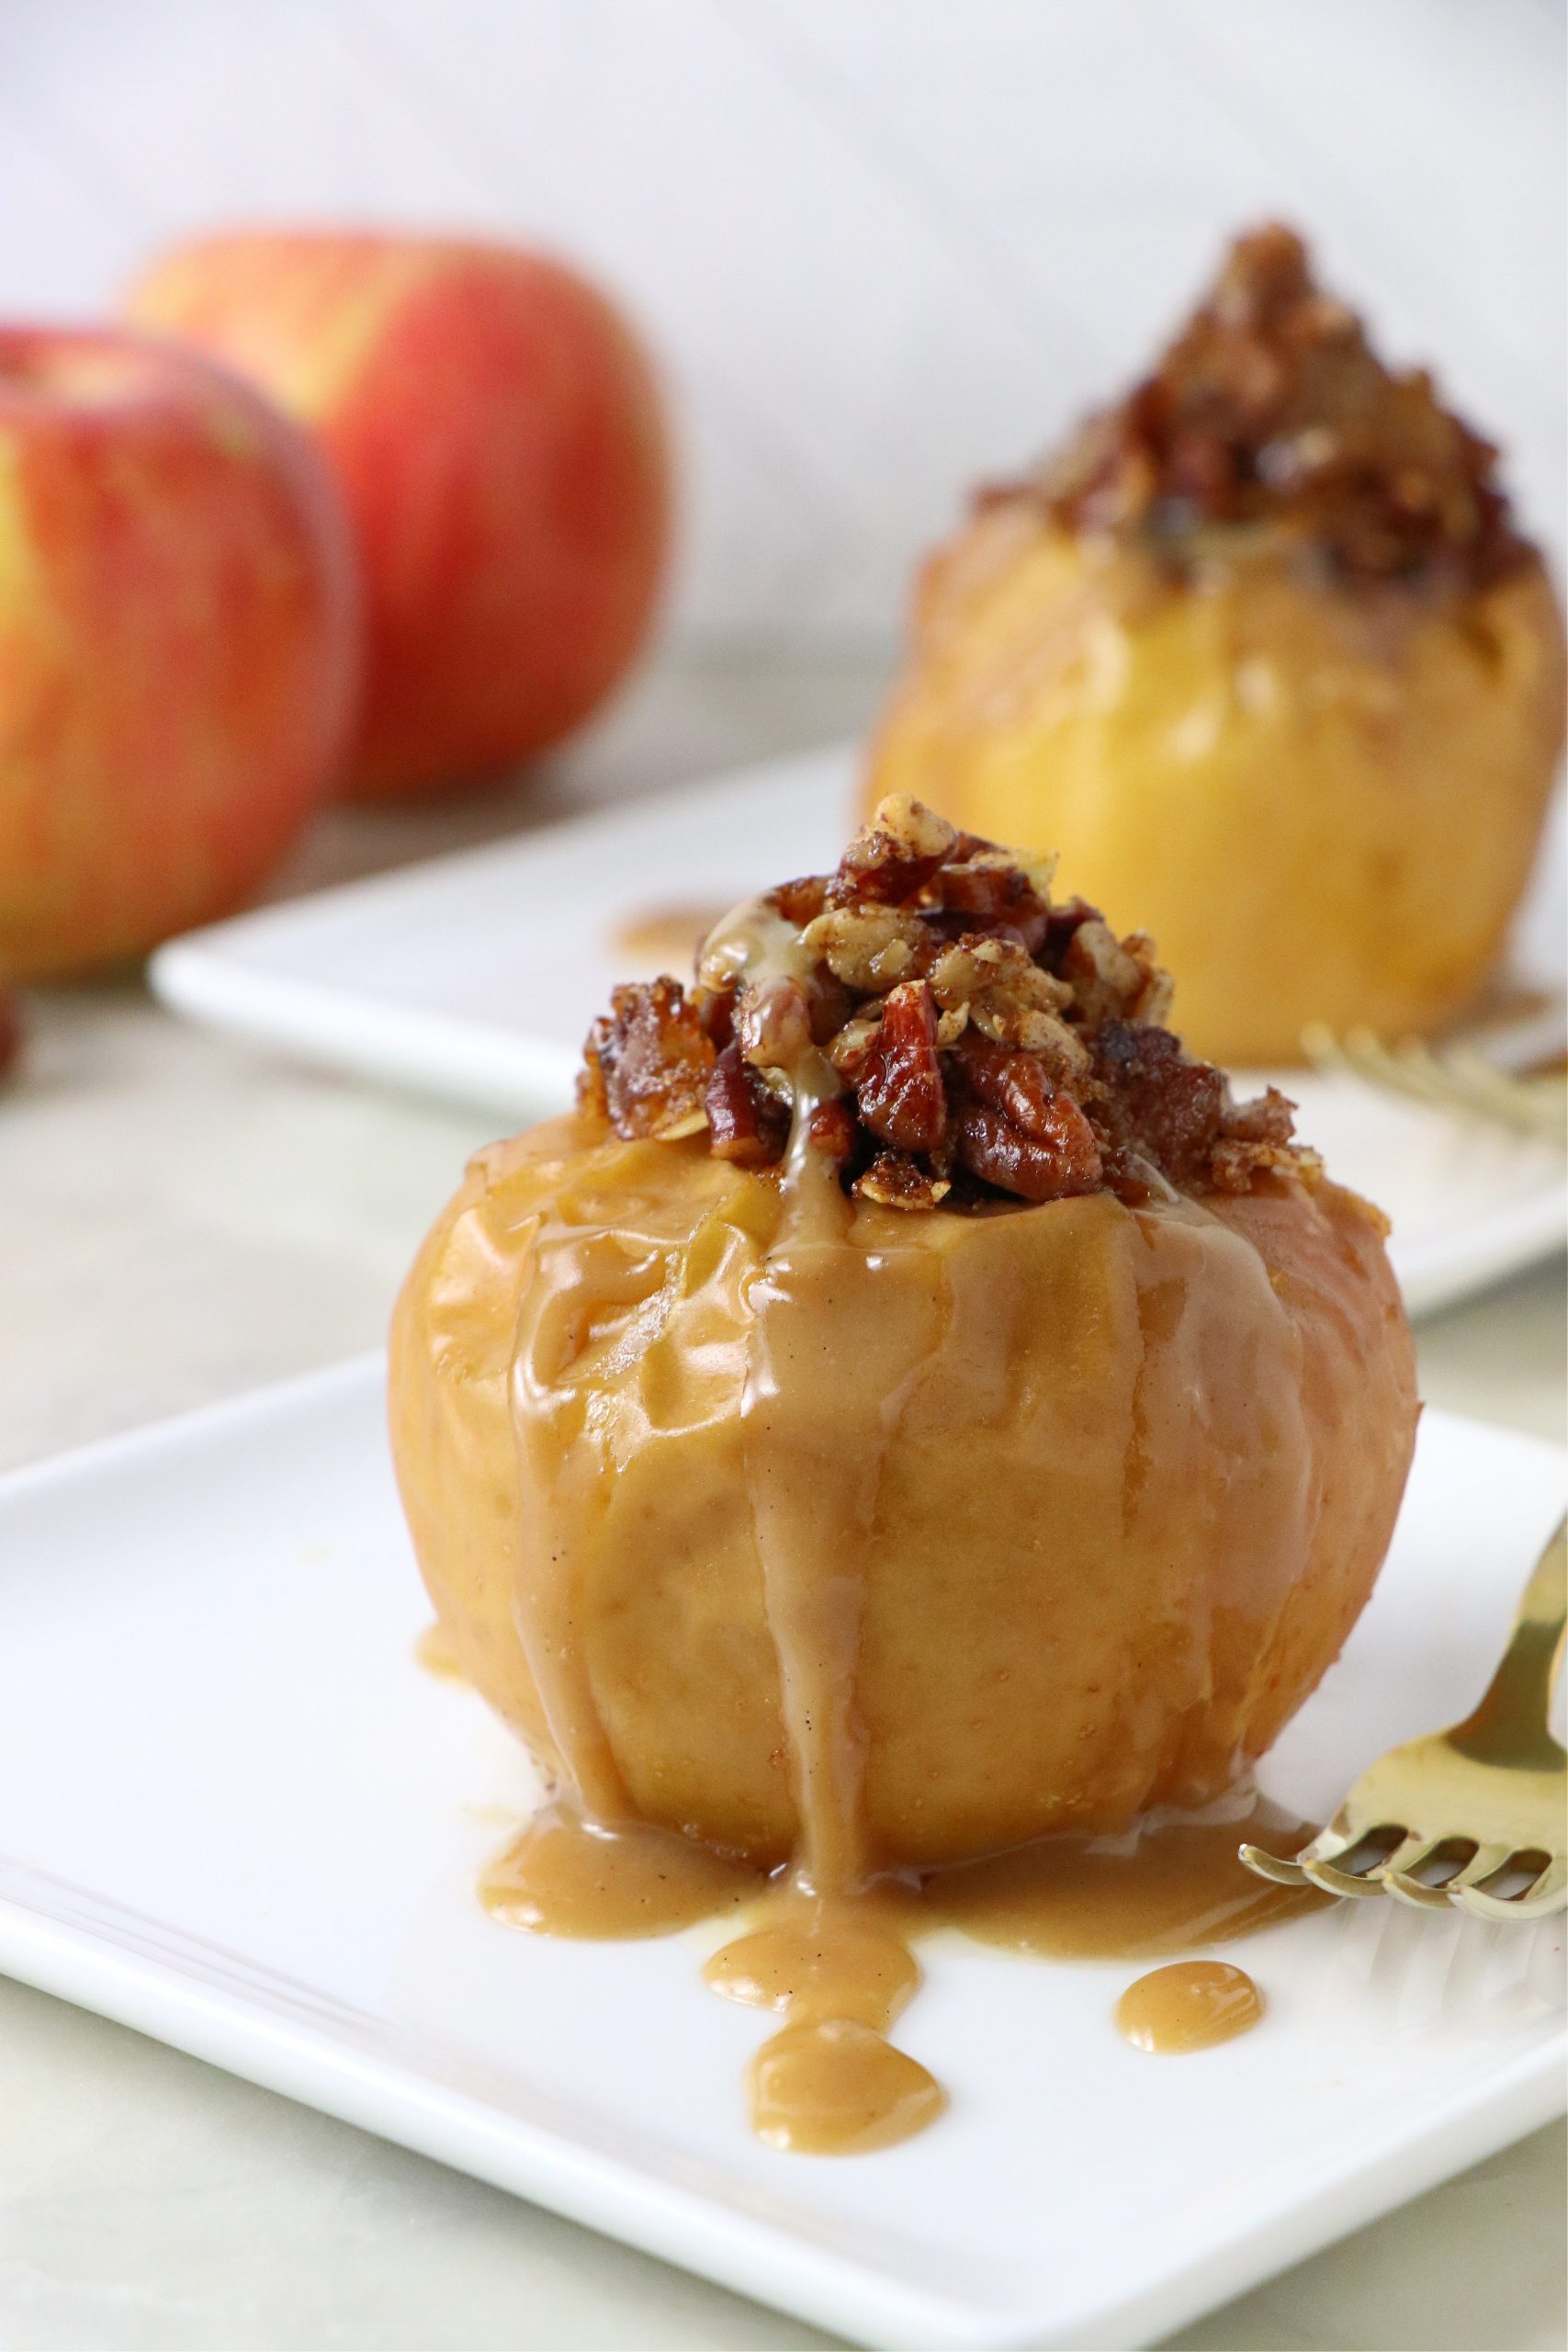 Vegan Baked Apples with Salted Brown Butter Caramel